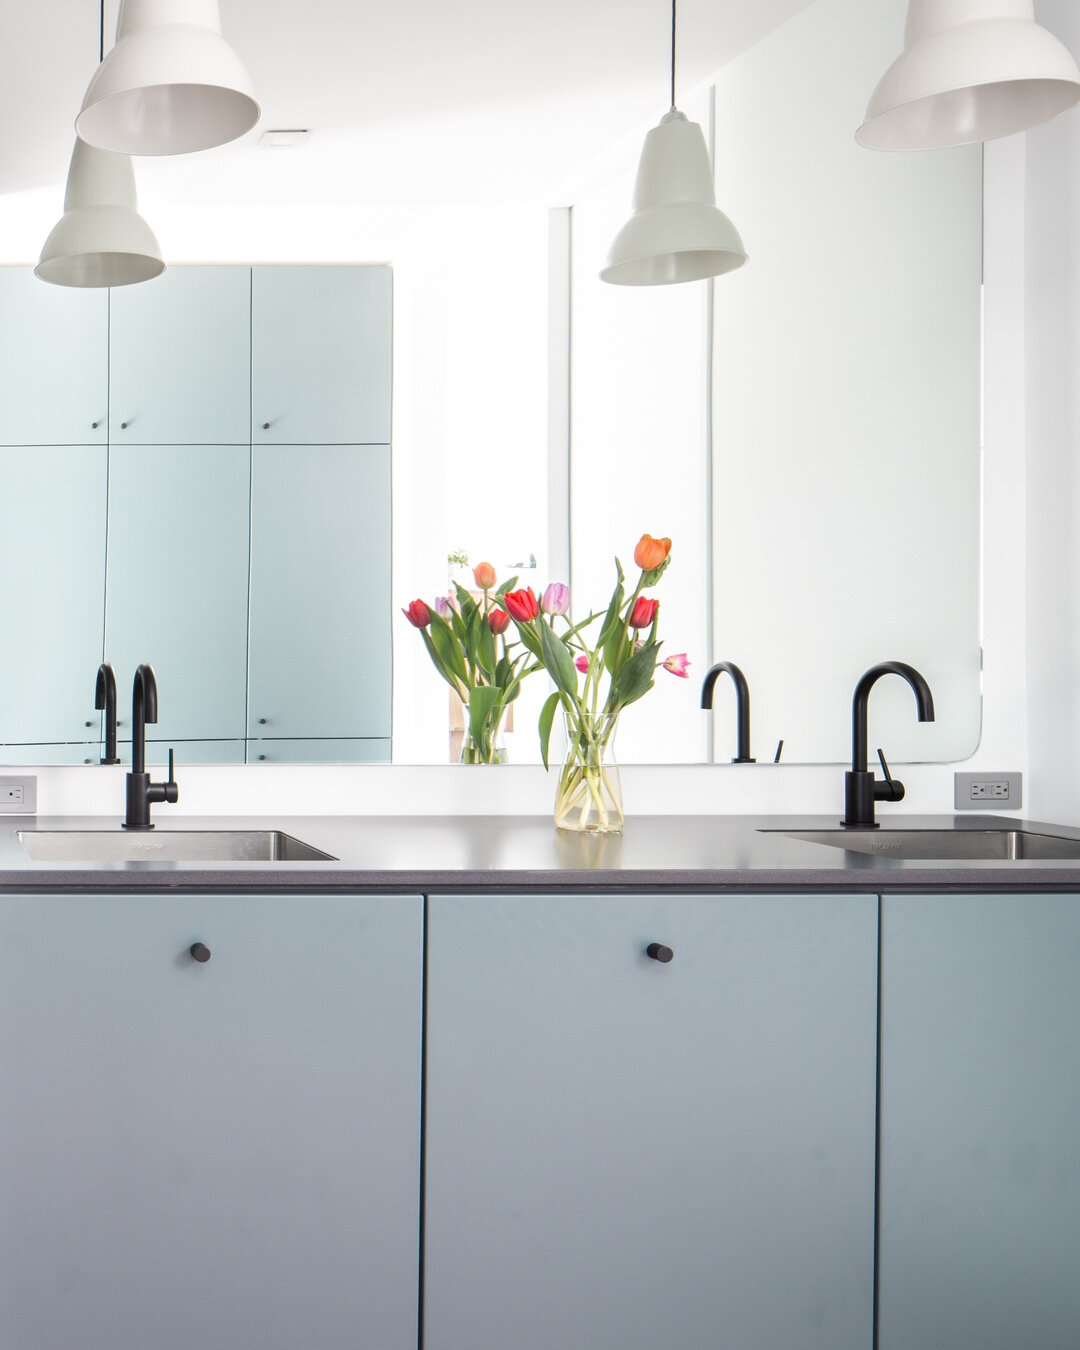 Each of our bathroom vanity countertops come with the choice of either @duratdesign solid surface countertops or @richlite resin-infused paper countertops. Durat is a unique ecological solid surface material which contains recycled pre-consumer plast